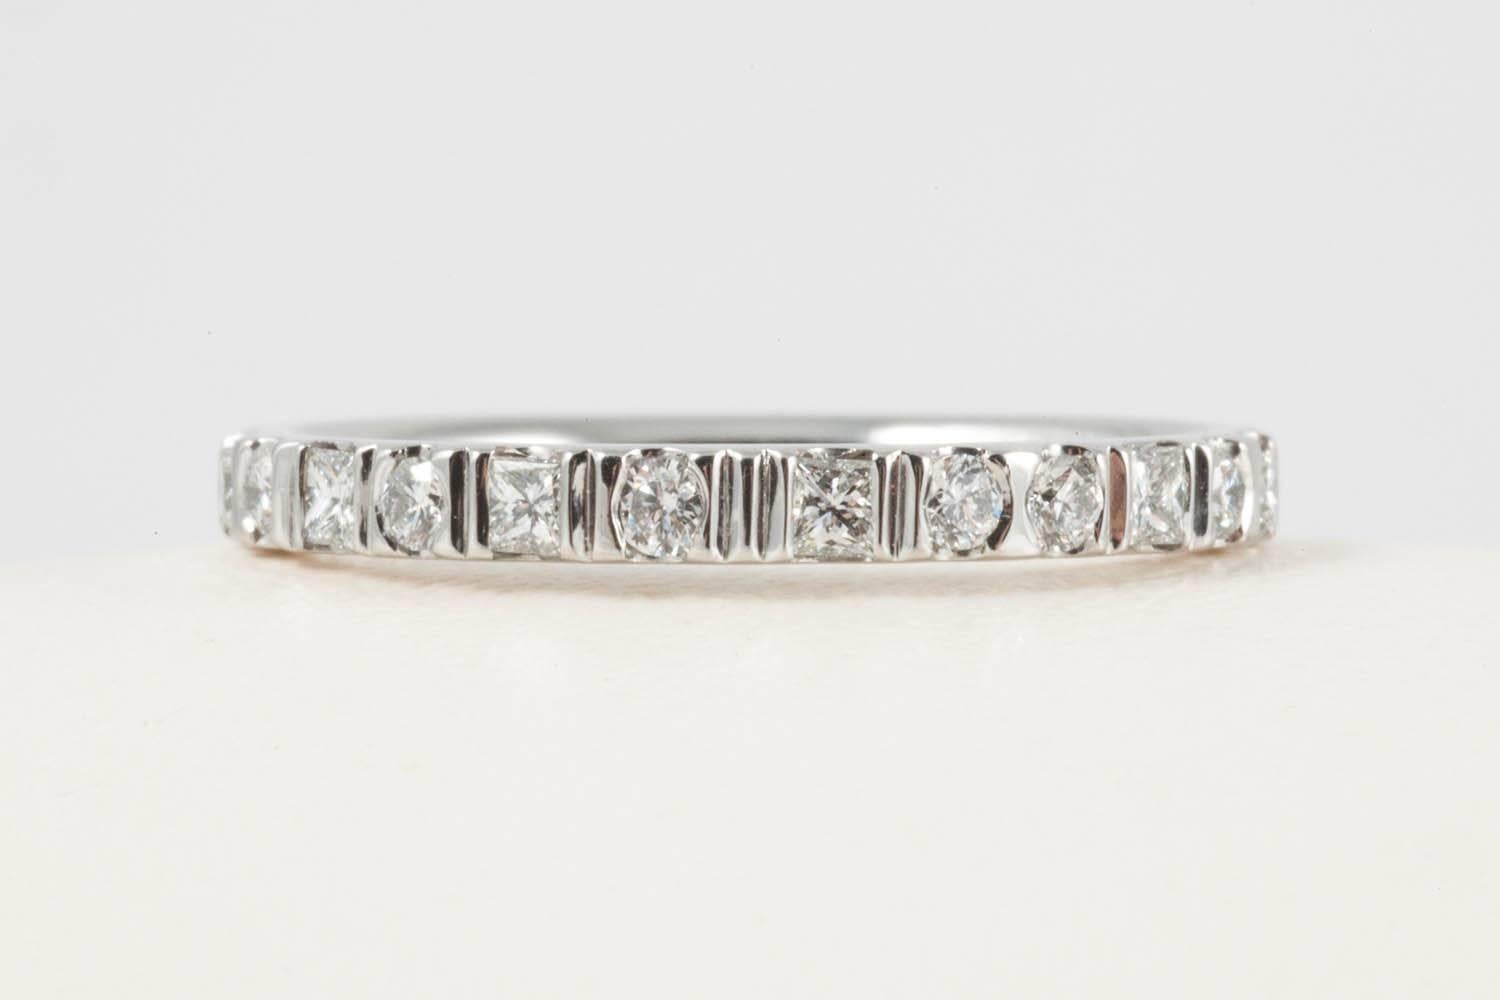 Code by Edge uses the zeros and ones of the binary code in round and premium cut princess cut diamonds of G colour VS clarity to hide the bride and groom's initials within the wedding band. Hand made in our Bond Street workshop these wedding bands